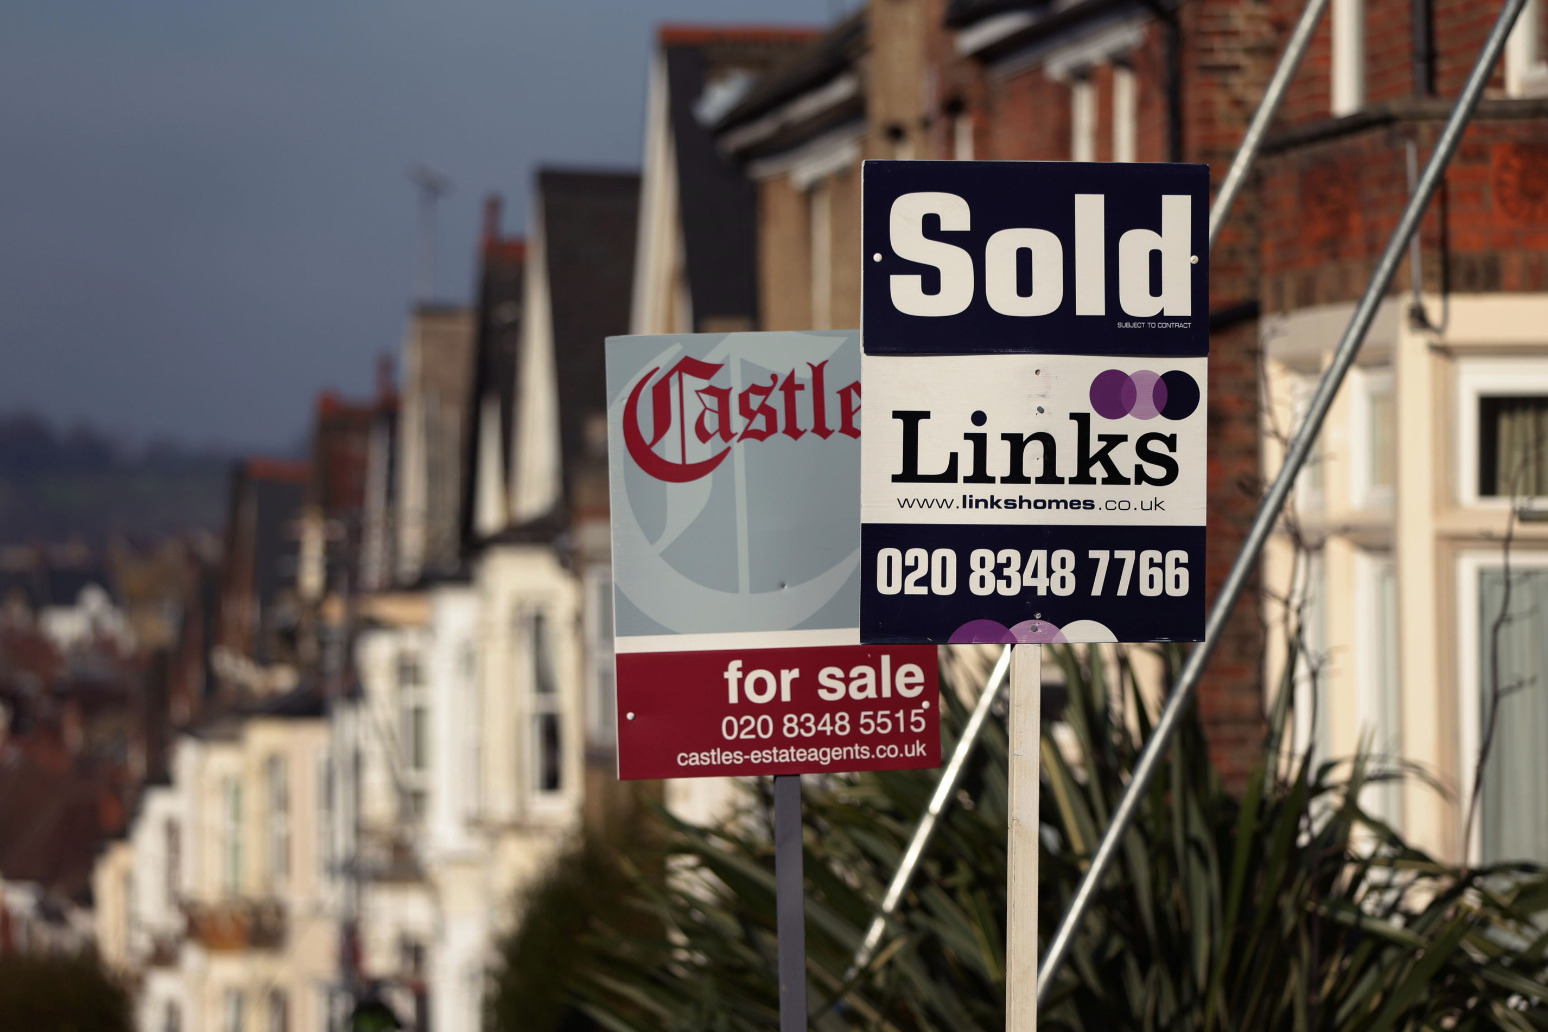 London home buyers need £35k higher income for mortgage 